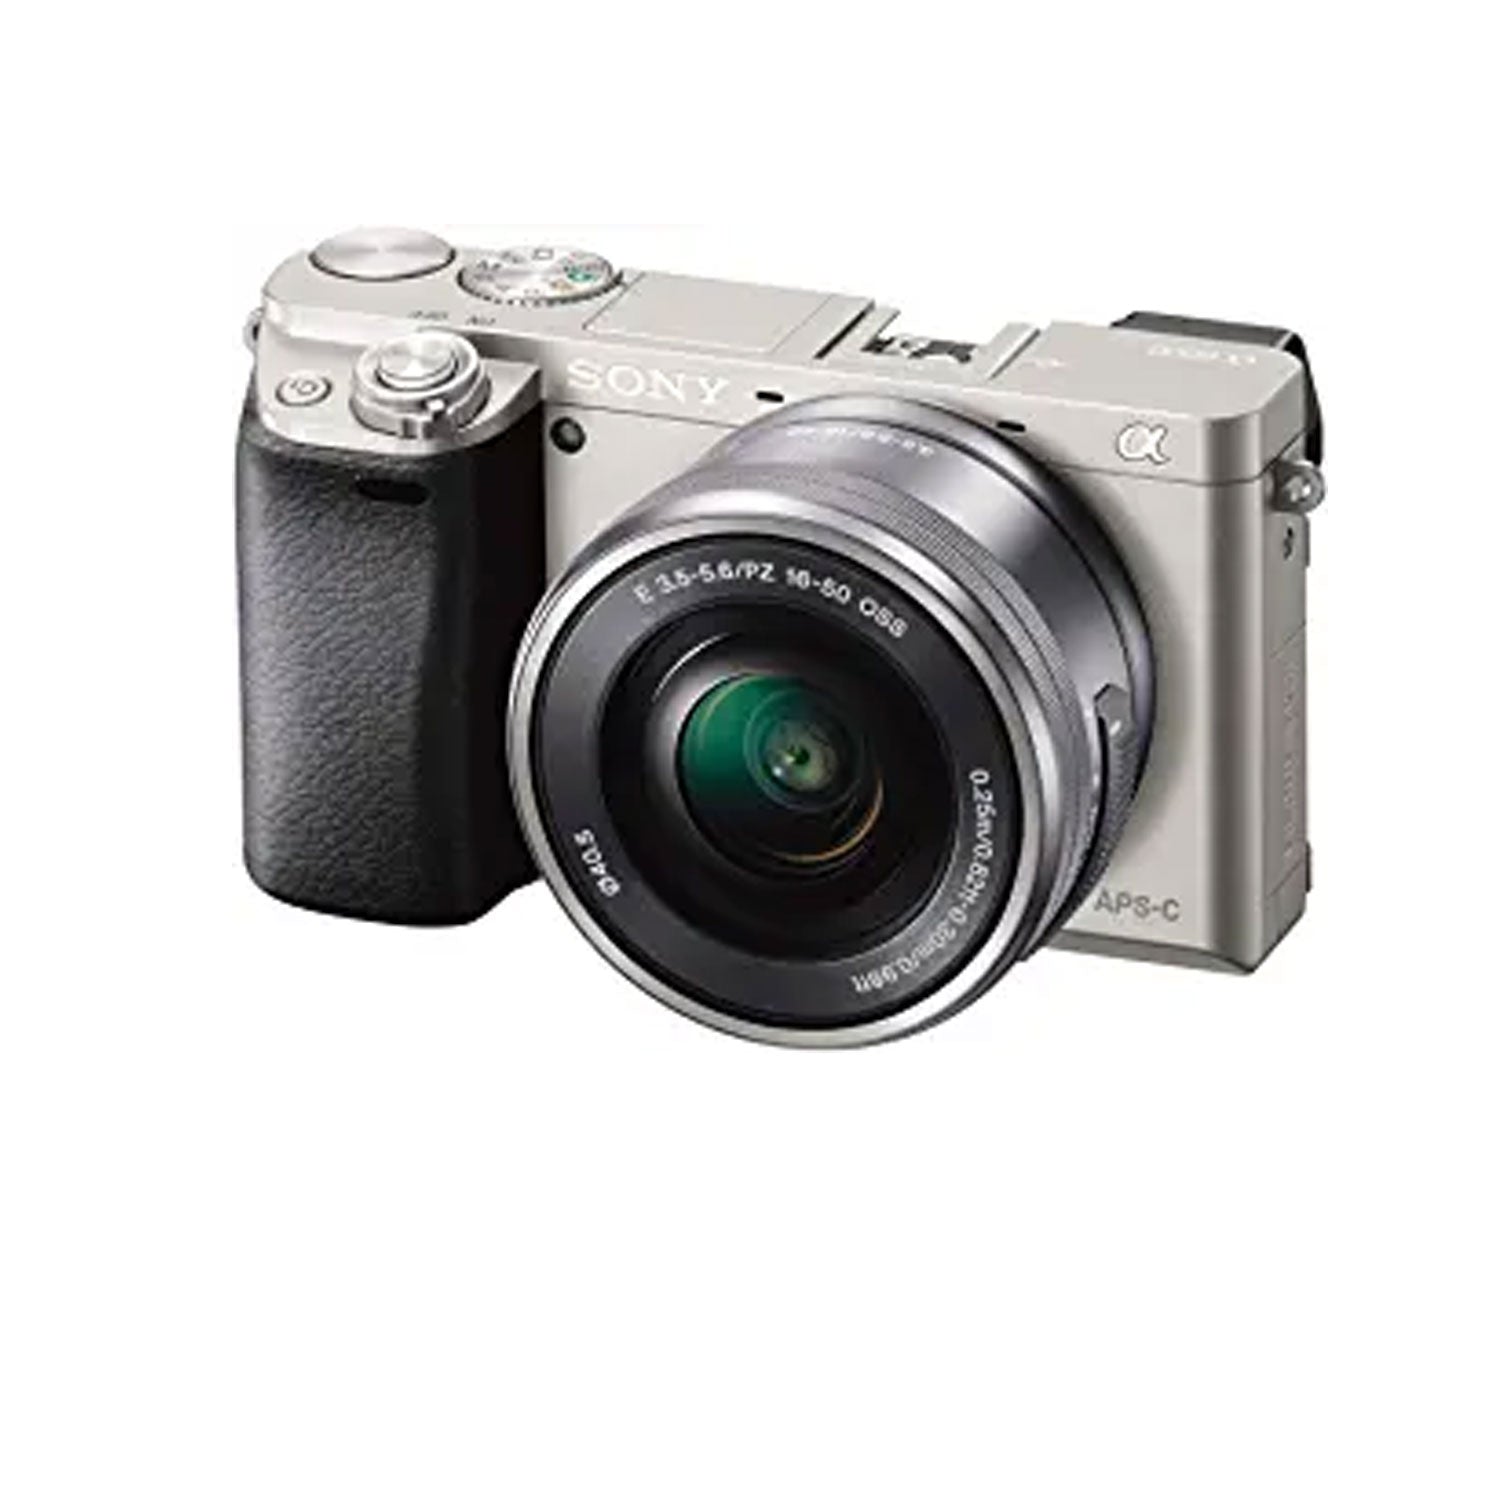 Sony Alpha a6000 Mirrorless Digital Camera with 16-50mm + 55-210mm Lenses (SILVER) with 64GB Memory Card -International Model Bundle